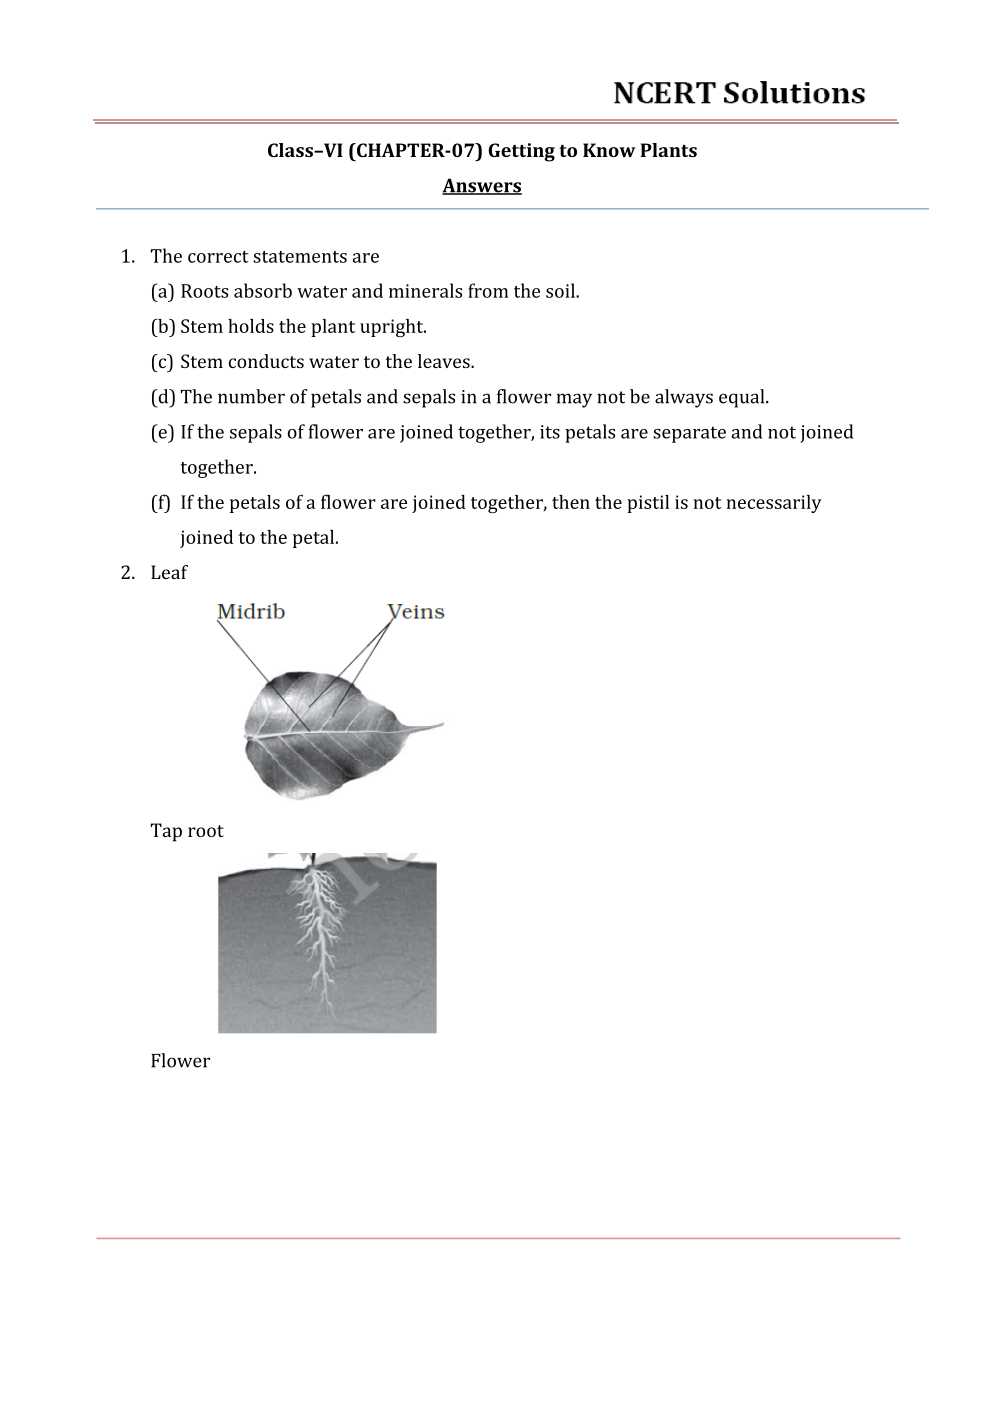 NCERT Solutions For Class 6 Science Chapter 7